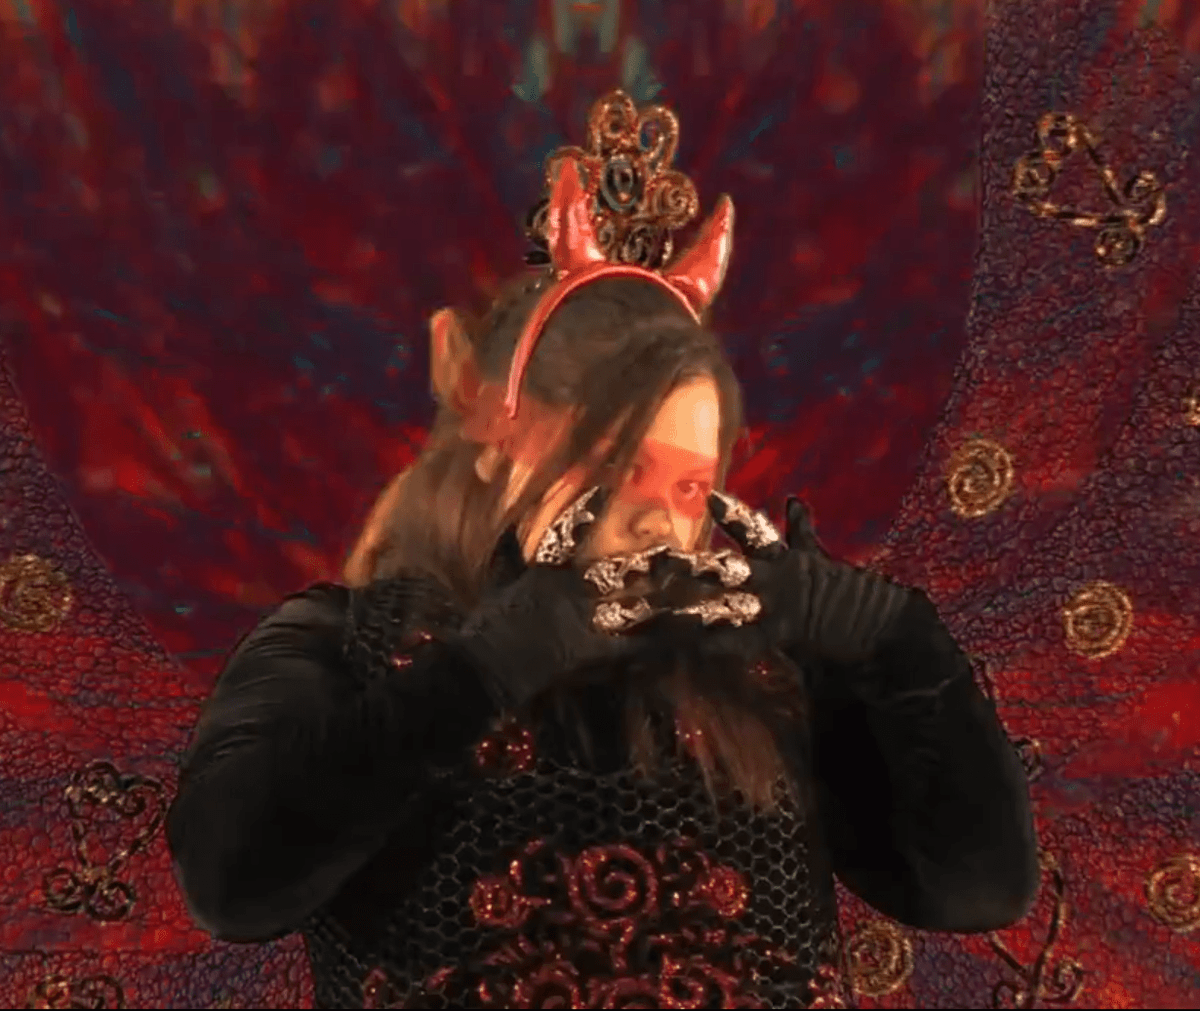 Candice is dressed in glamorous costuming, wearing black gloves with jewellery on top, devil horns and a red and black dress. They are dancing in front of a swirling red textured background